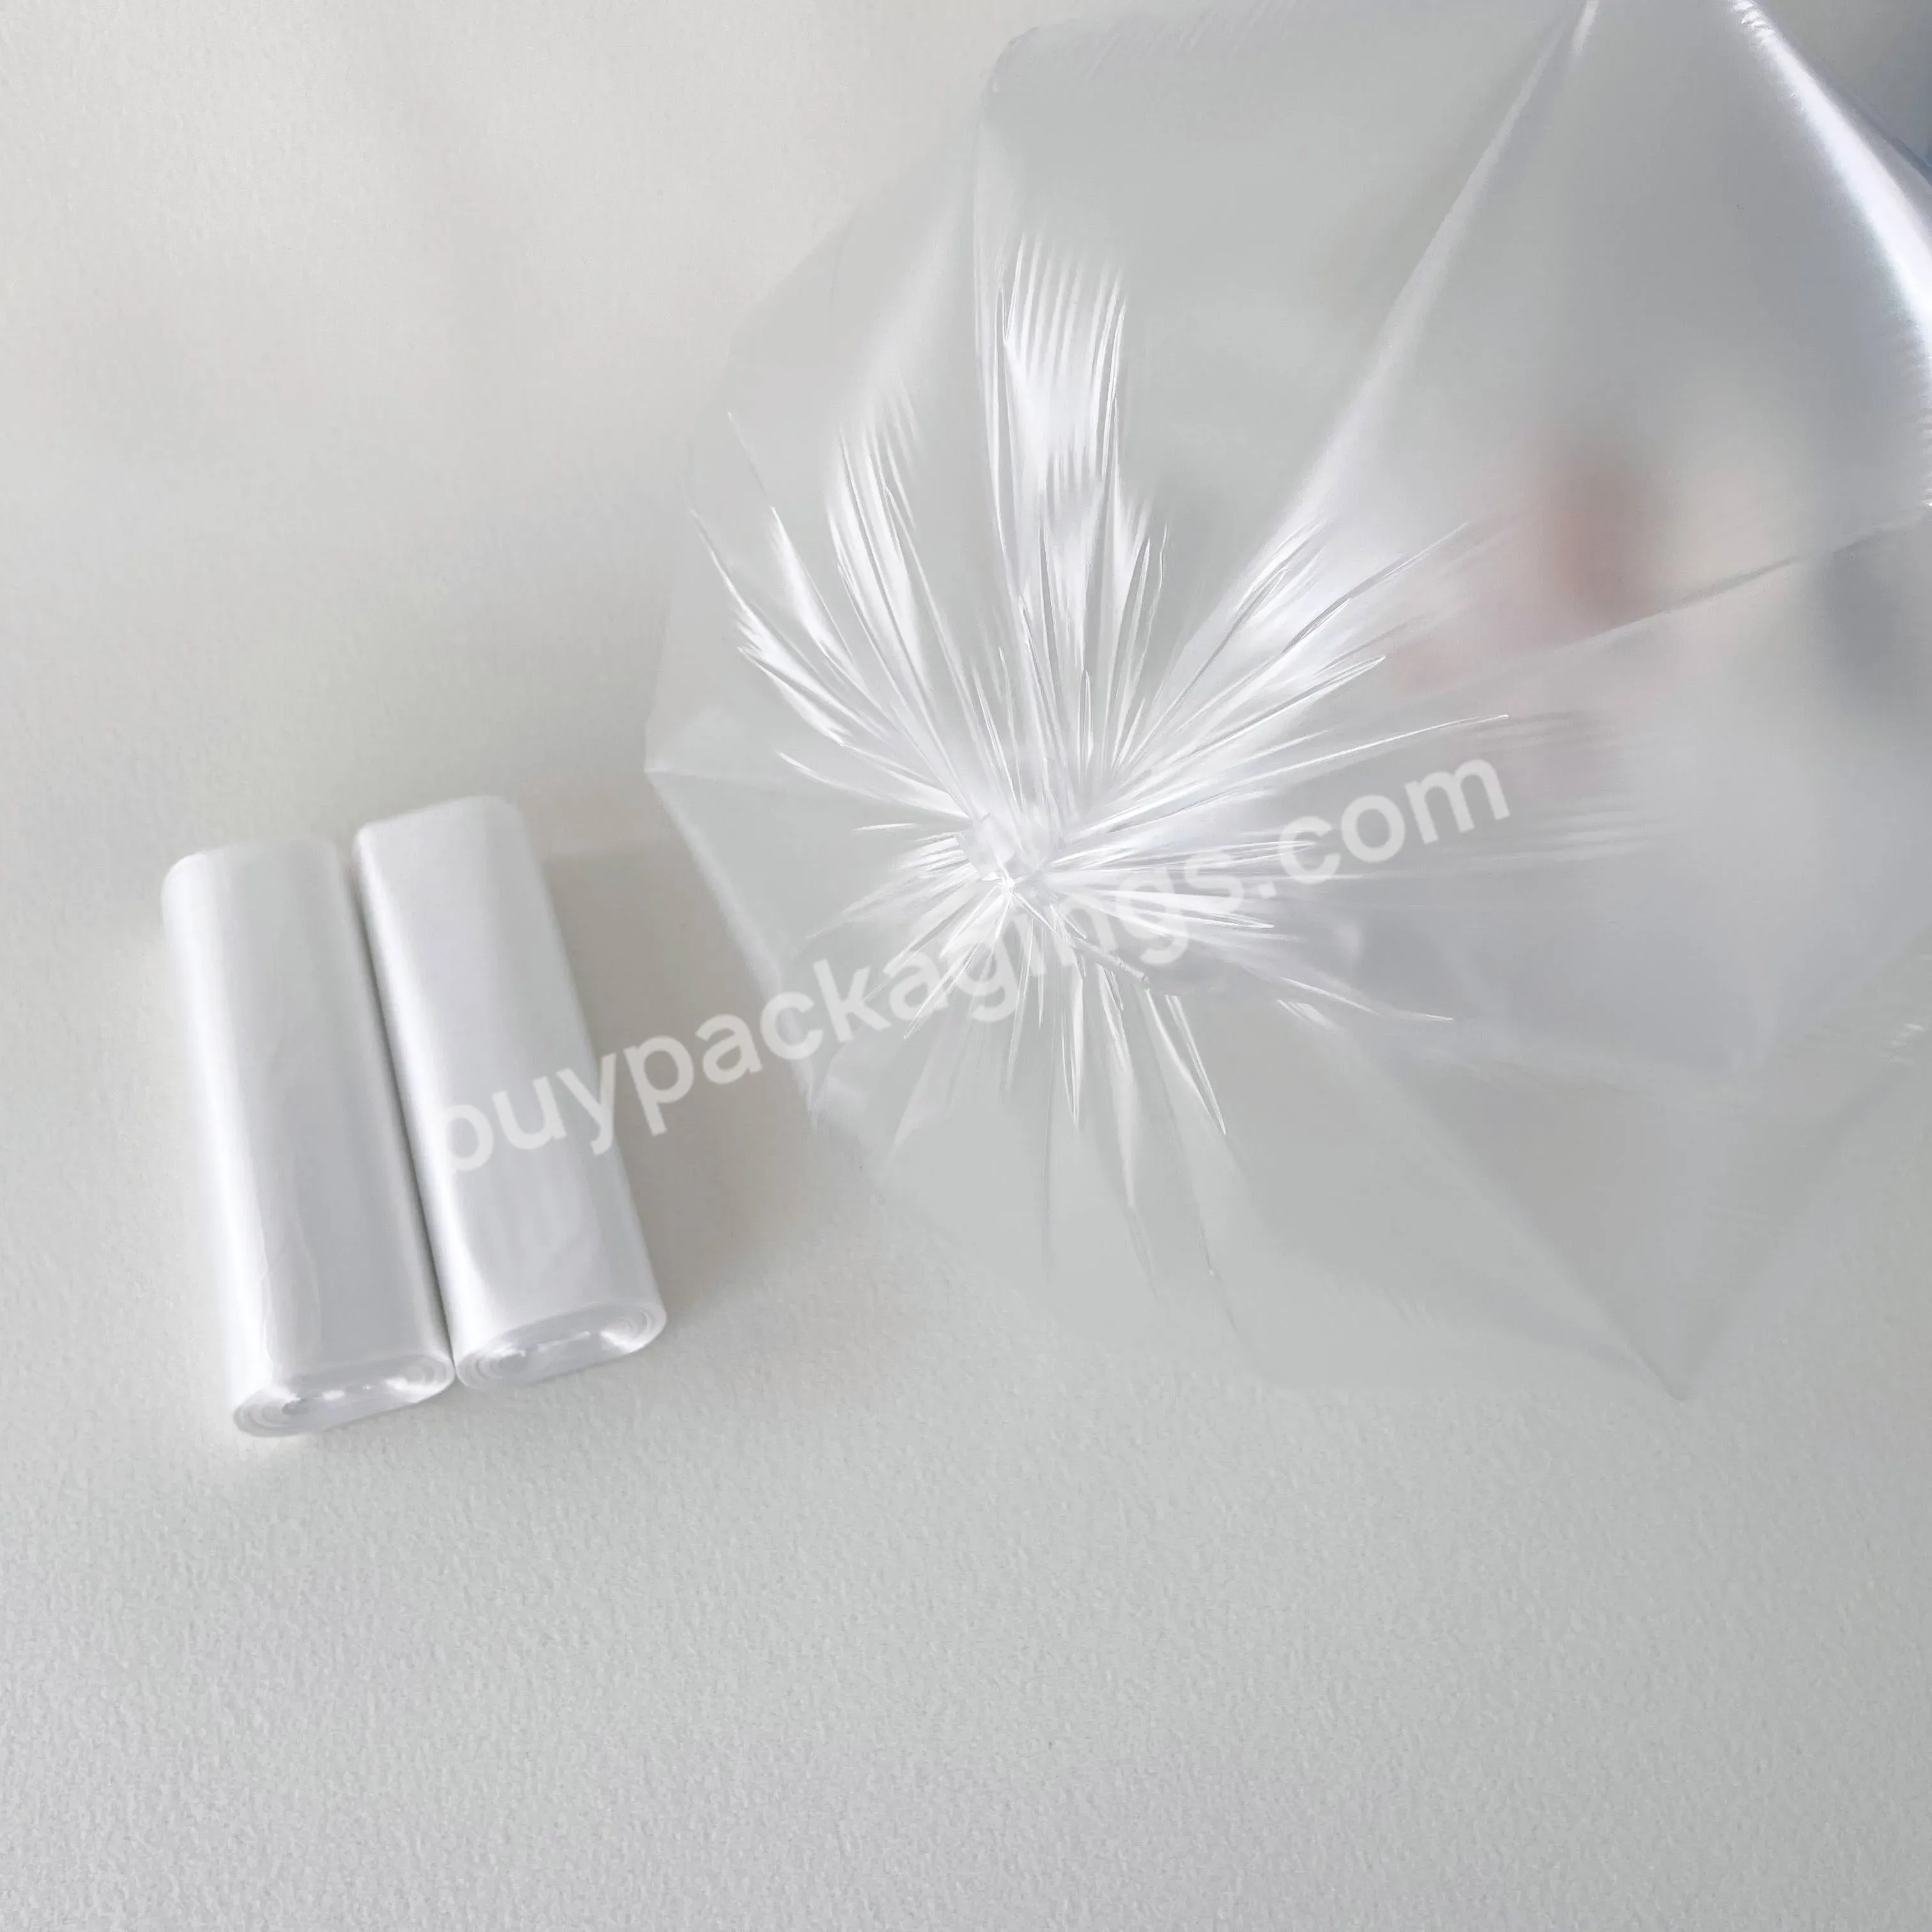 High Density Plastic Trash Can Liners Garbage Bag For Toter Clear Plastic Poly Garbage Bin Liner Packaging Trash Bag - Buy Plastic Poly Garbage Bin Liner Packaging Trash Bag,Garbage Bag,Plastic Trash Can Liners Garbage Bag For Toter.